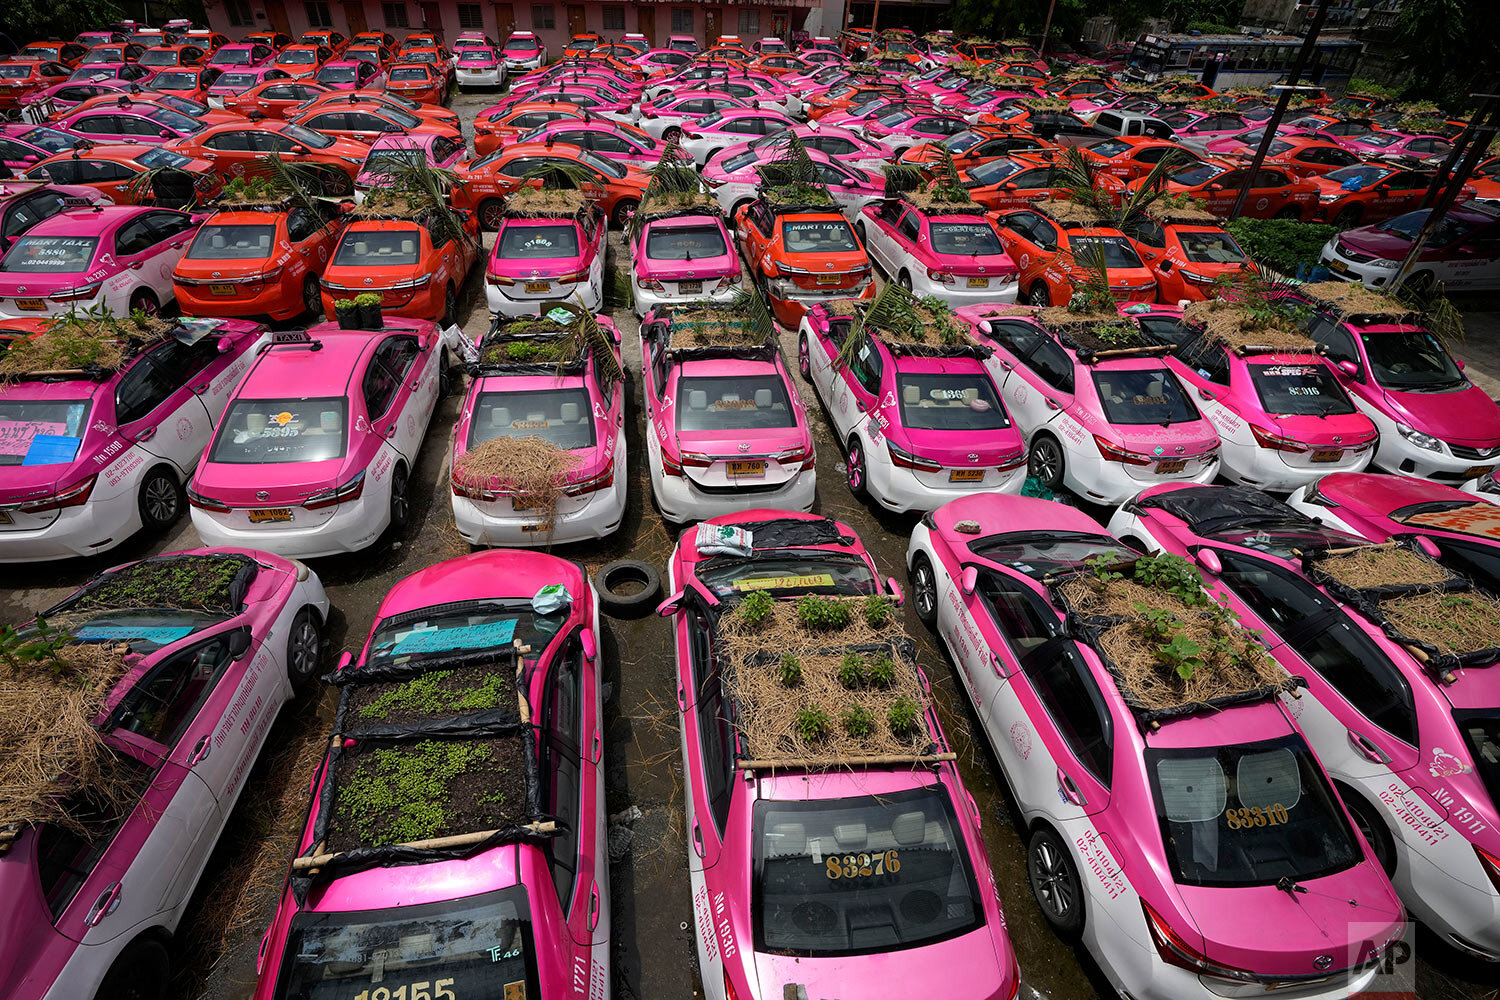  Miniature gardens are planted on the rooftops of unused taxis parked in Bangkok, Thailand, Thursday, Sept. 16, 2021.  (AP Photo/Sakchai Lalit) 